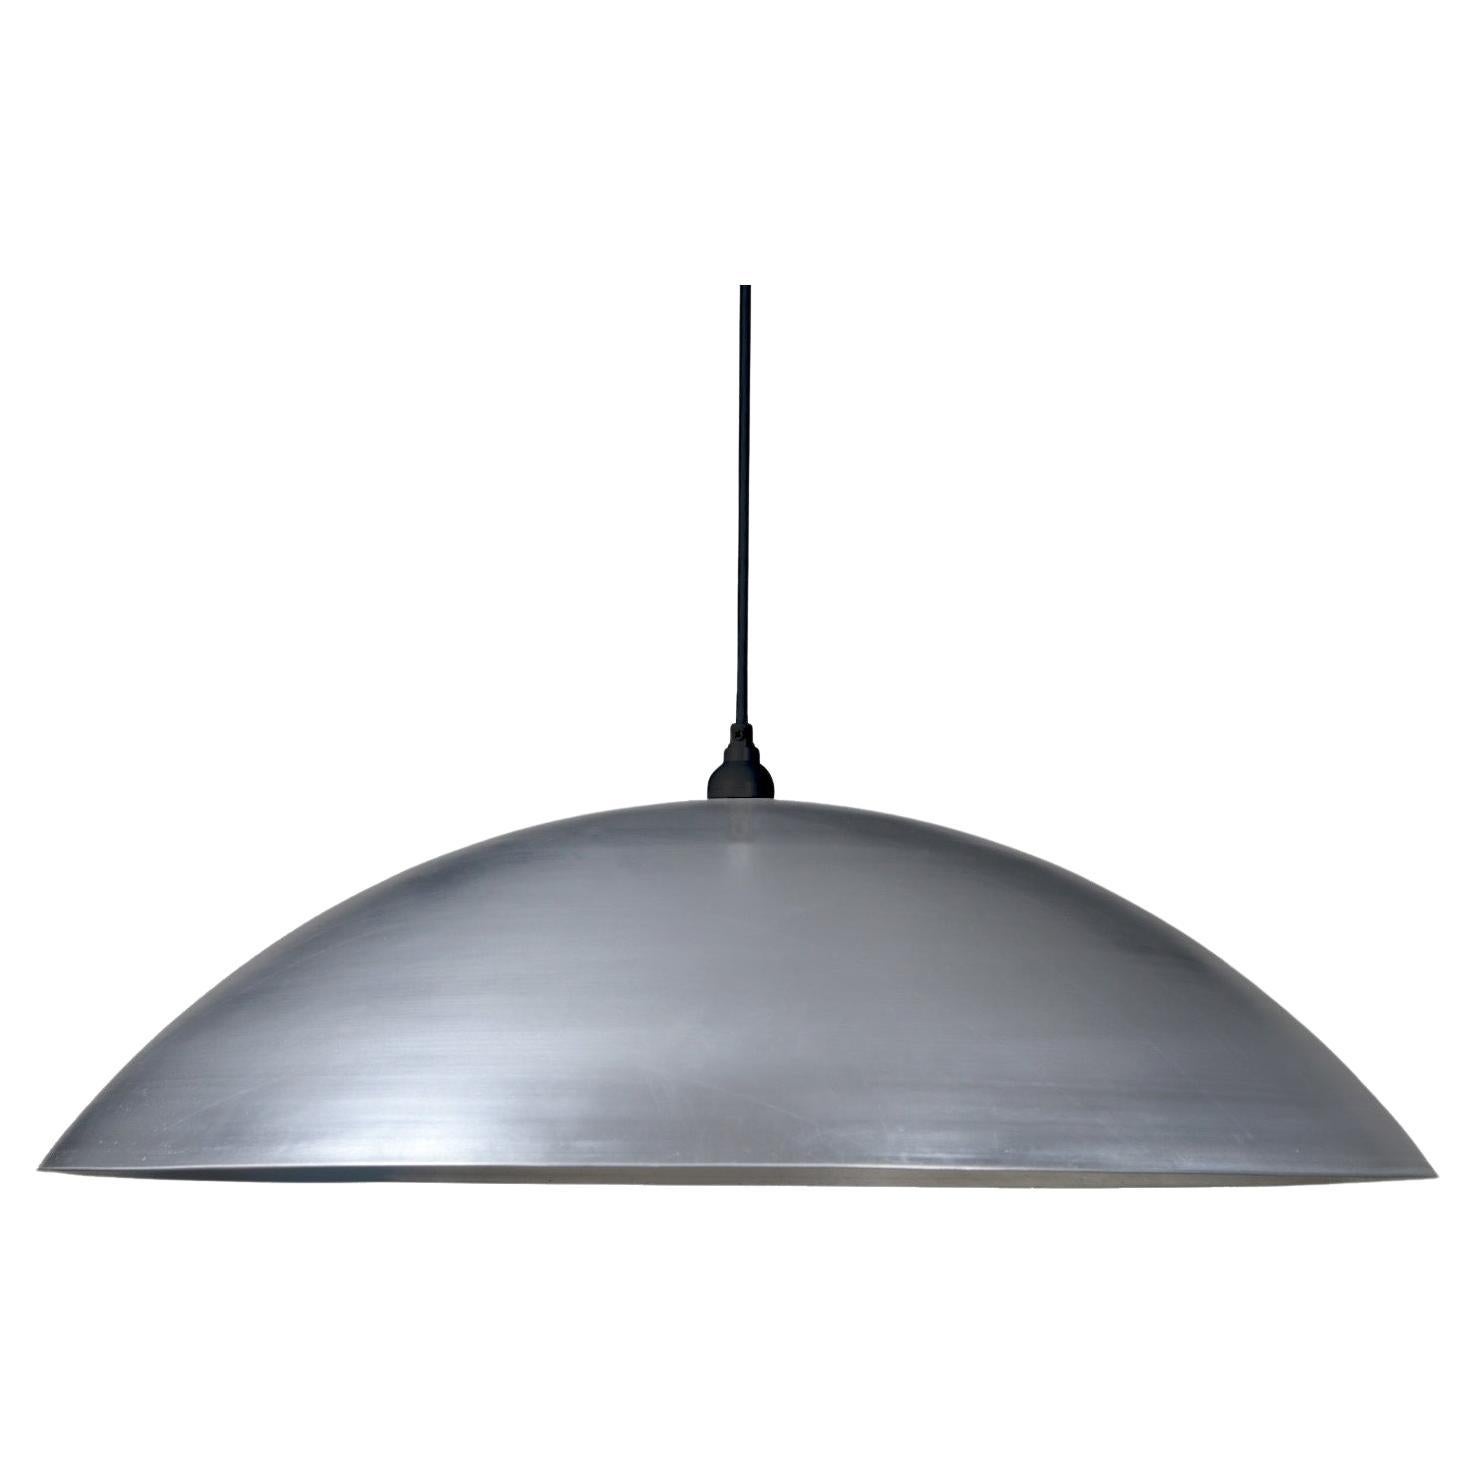 Customizable Oversized Pendant by RESEARCH Lighting, Waxed Aluminum, MTO